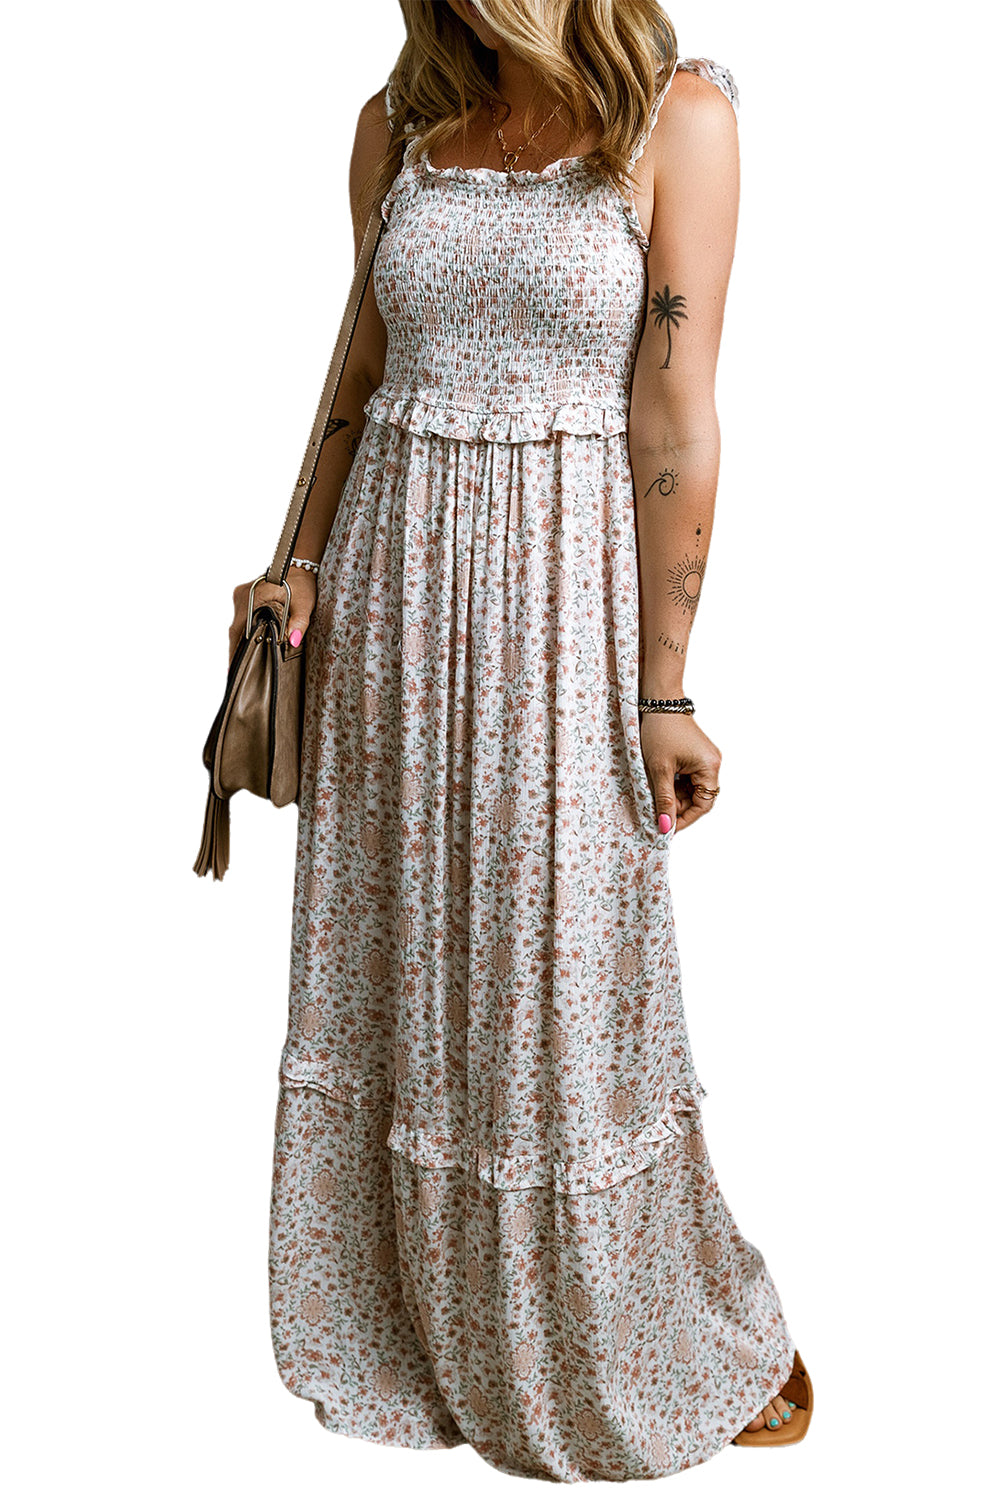 Blue Zone Planet |  White Lace Frilly Straps Shirred Floral Maxi Dress Blue Zone Planet